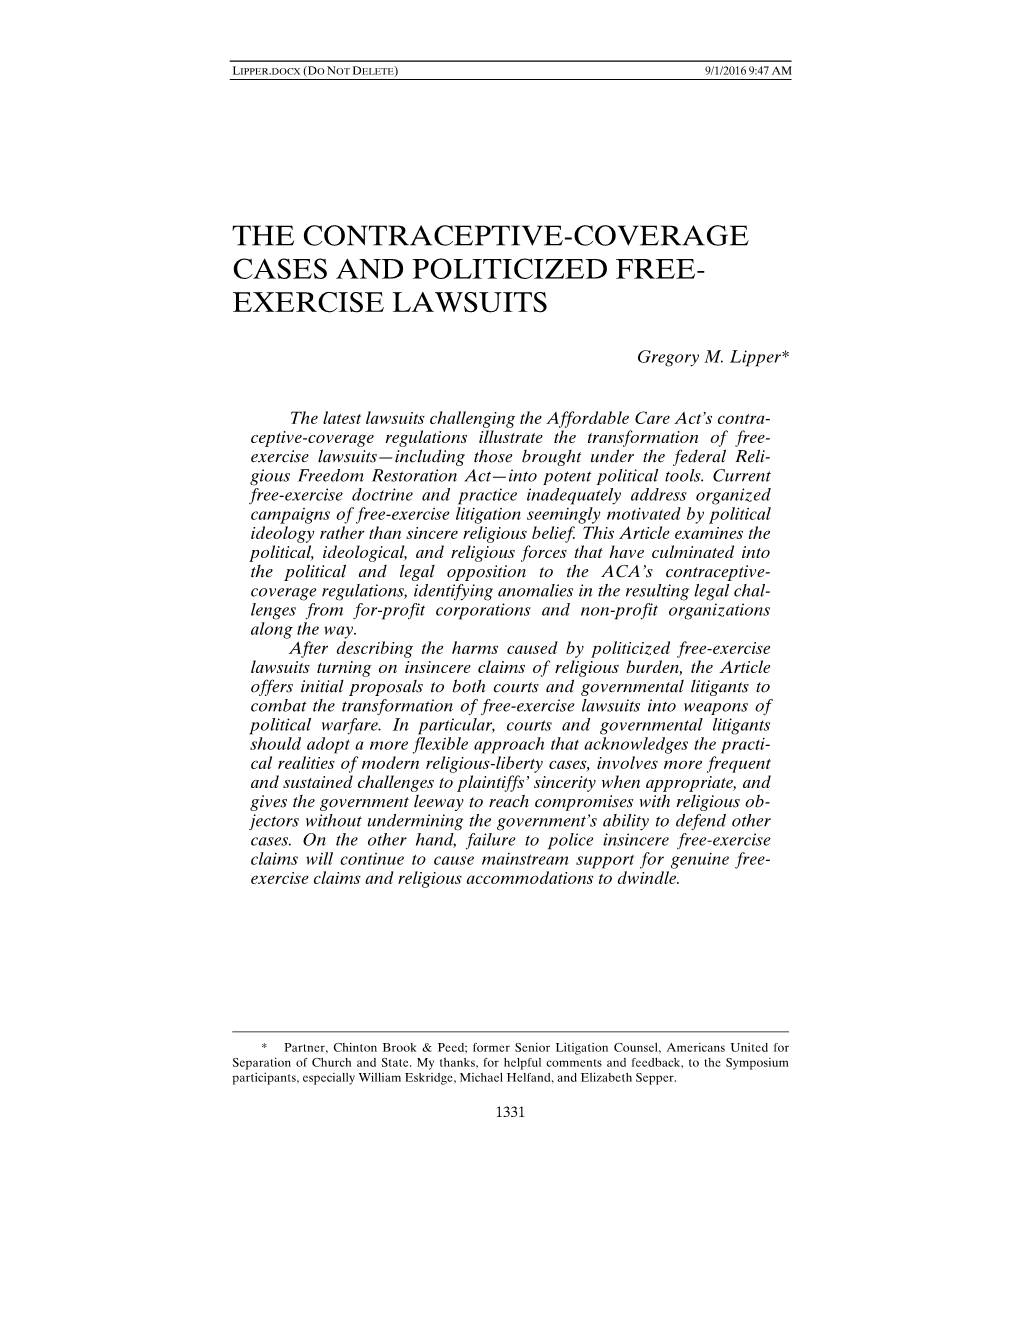 The Contraceptive-Coverage Cases and Politicized Free-Exercise Lawsuits